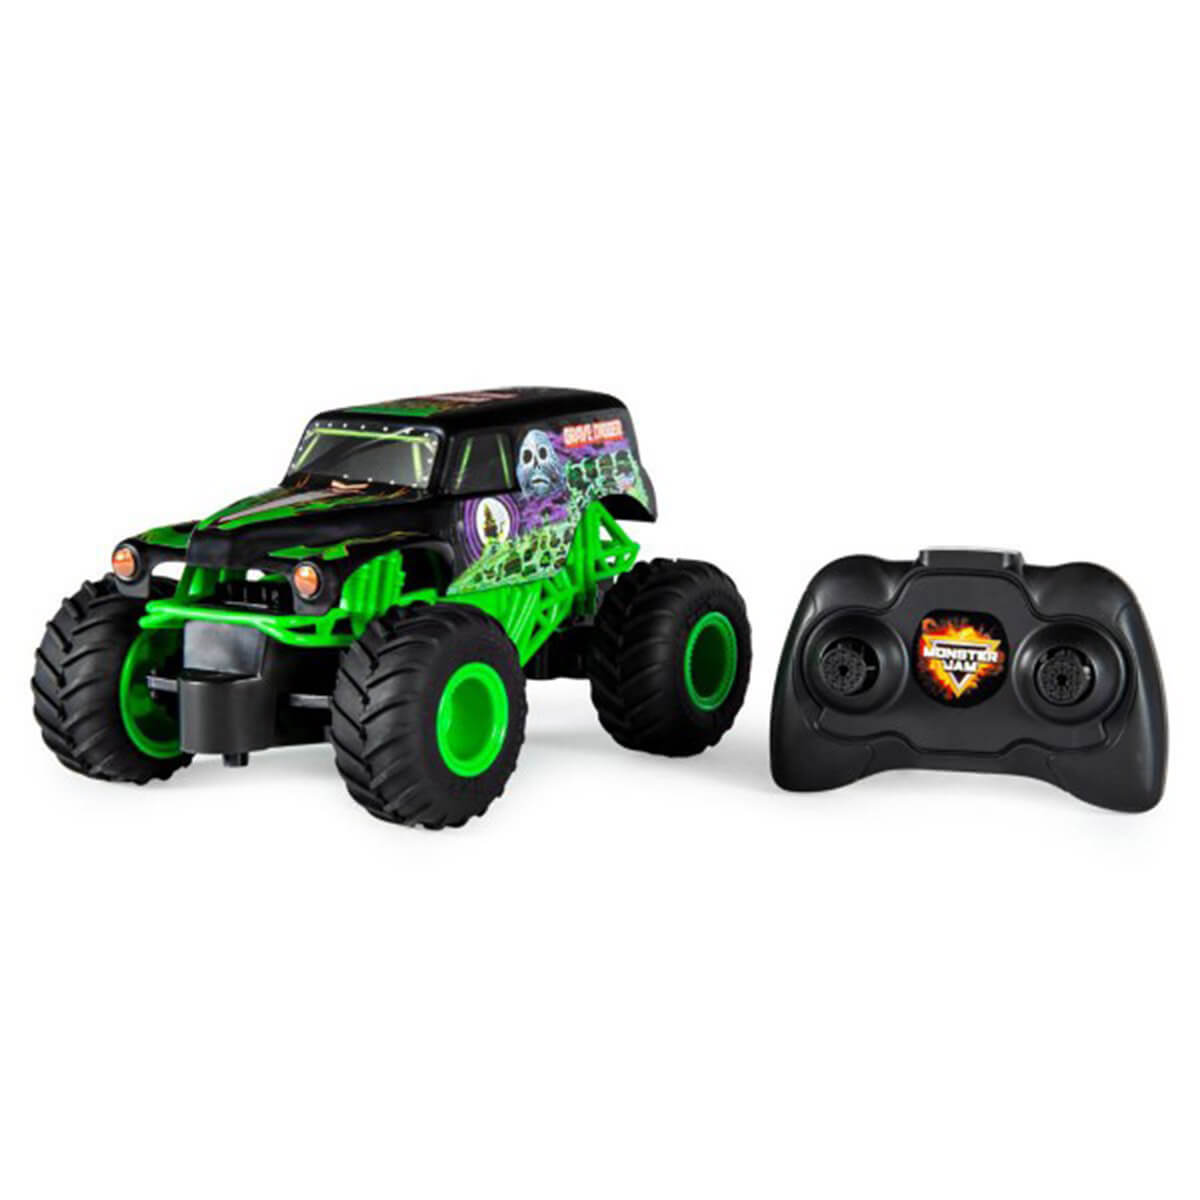 Monster Jam Full Function Remote Control Grave Digger 1:24 Scale RC Vehicle